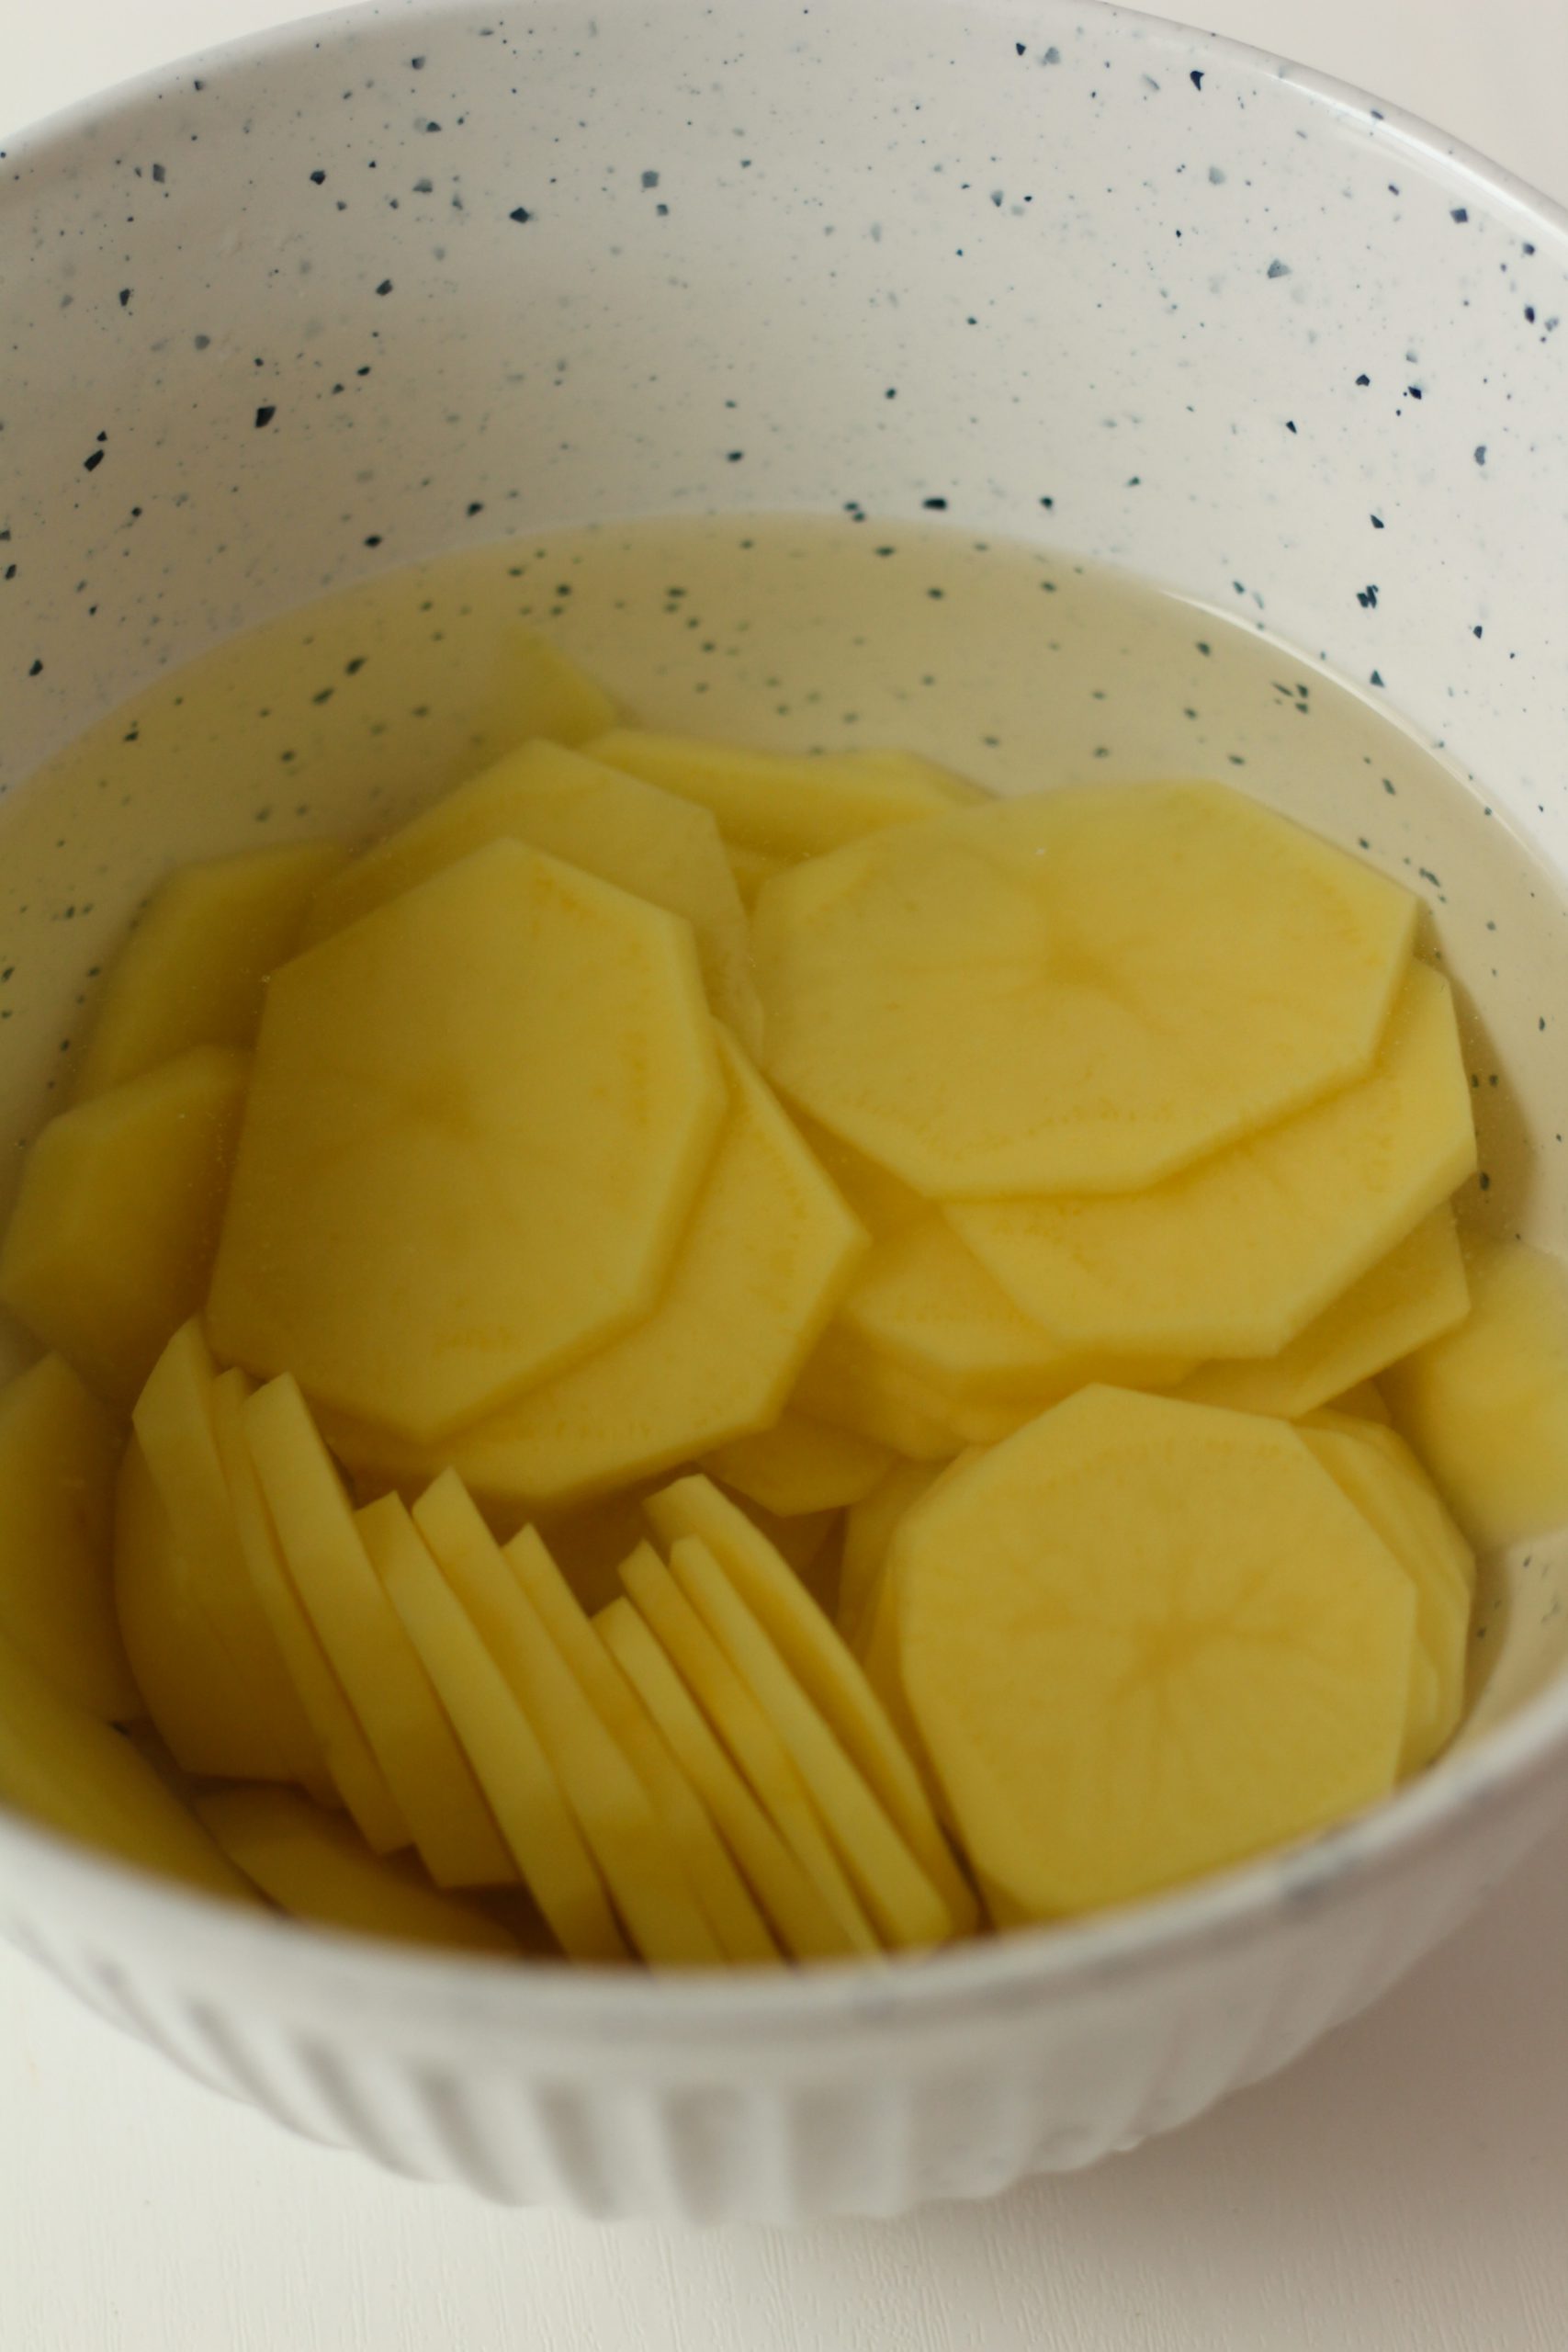 Potatoes soaking in cold water